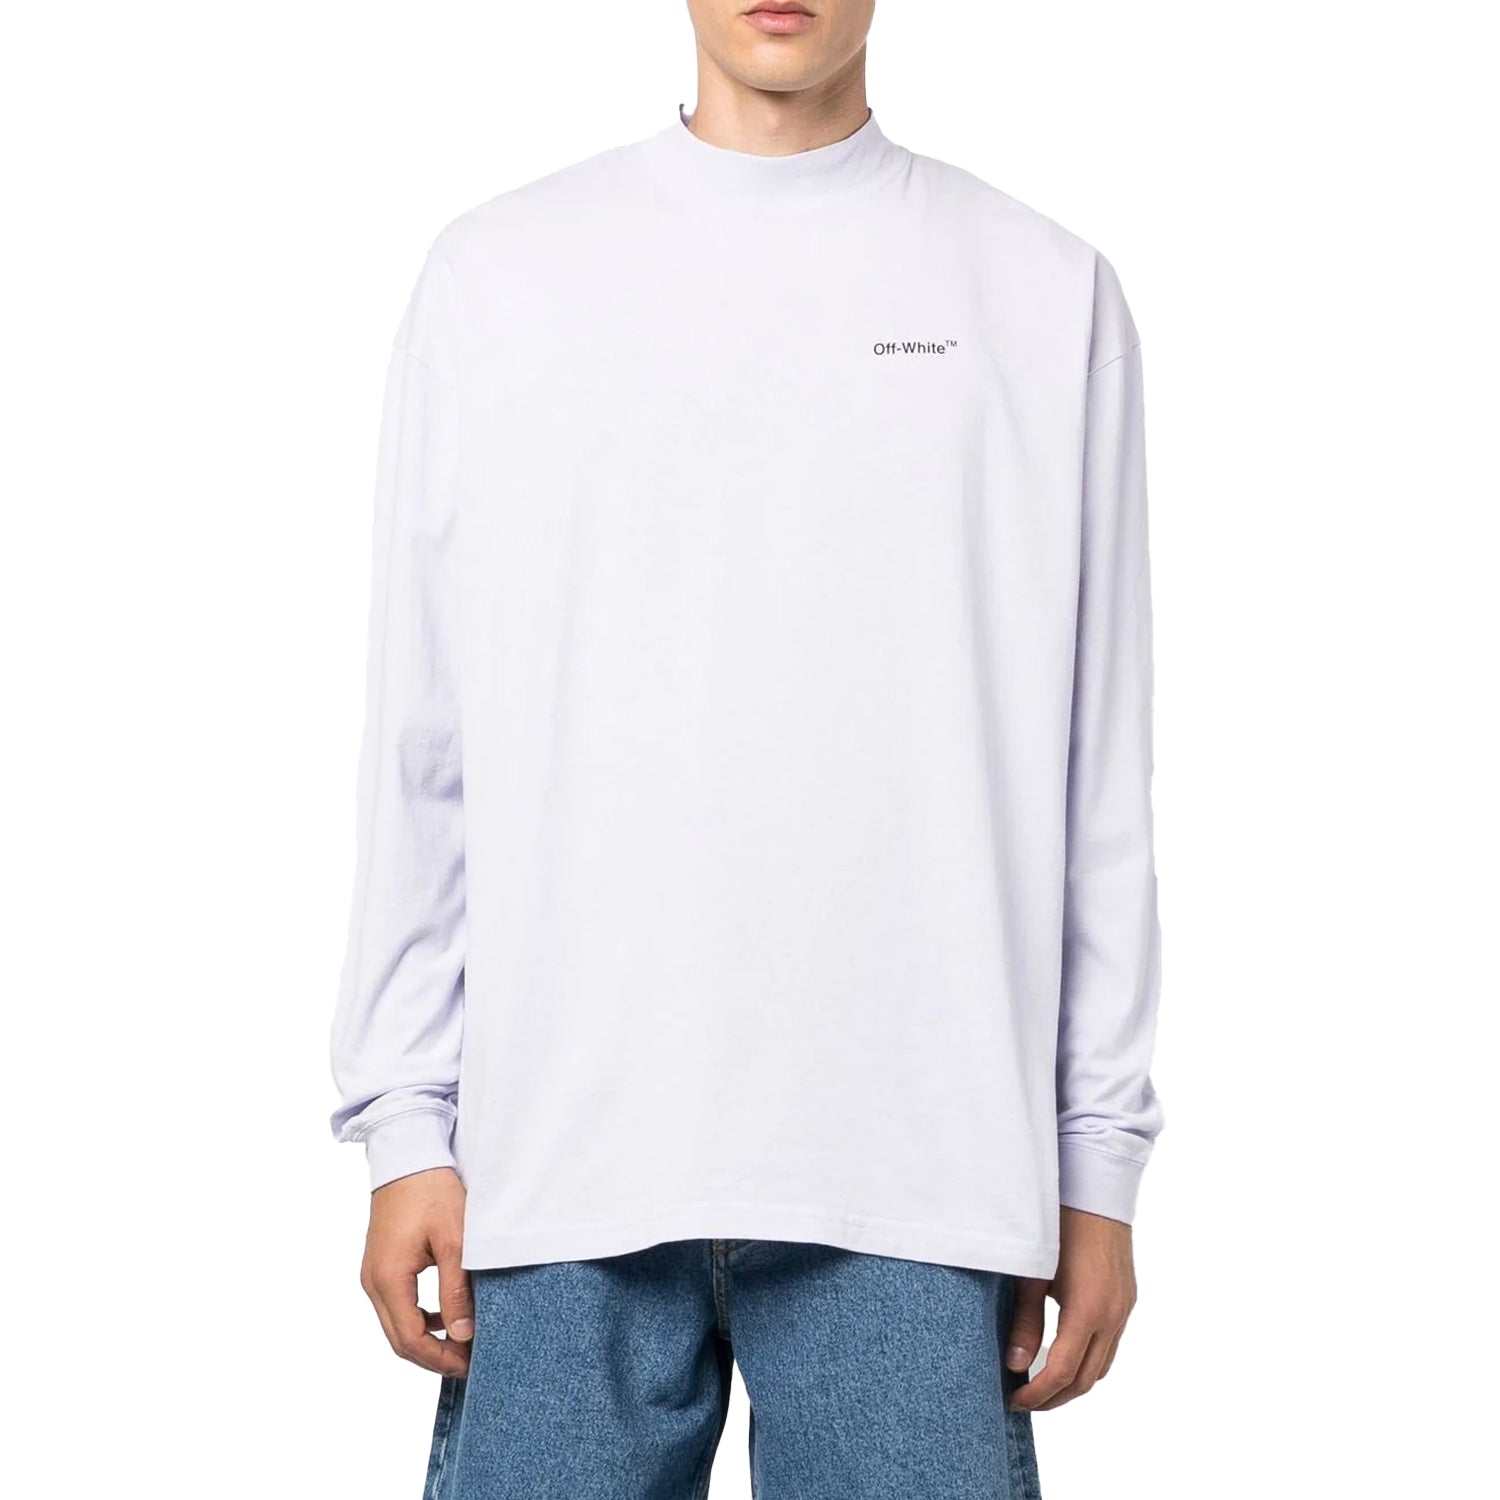 Off-white Caravag Arrow Over Mocknsc Mens Style : Omab032f22jer00